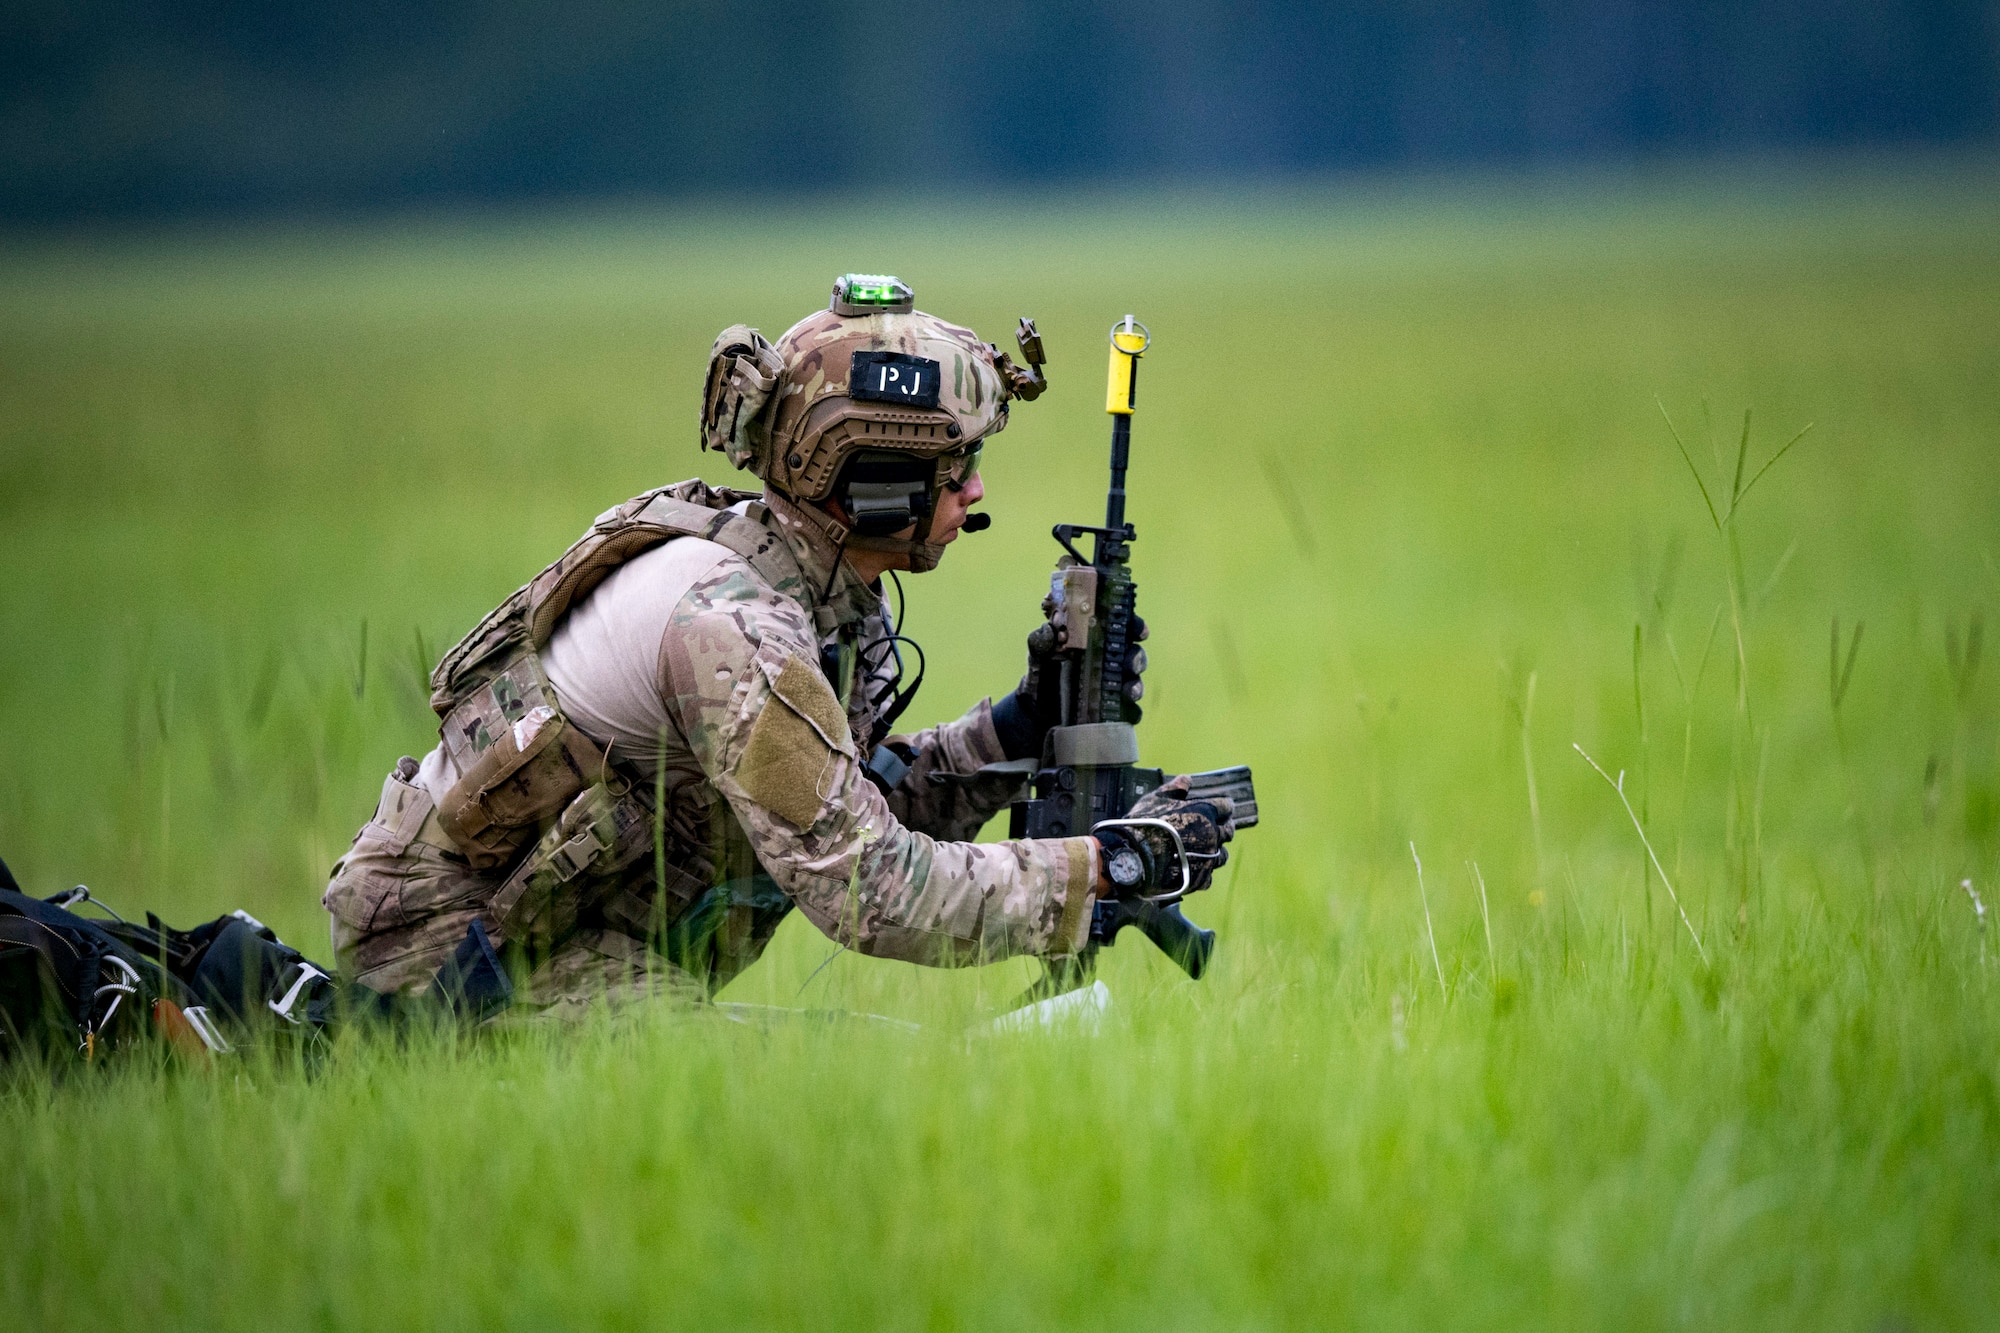 A Pararescueman from the 38th Rescue Squadron prepares his weapon during a rescue exercise, June 21, 2017, at Bemiss Field landing zone, Ga. The Air Force Research Laboratory from Wright-Patterson Air Force Base, Ohio and the Baltimore U.S. Air Force Center for Sustainment of Trauma and Readiness Skills, observed Moody's Combat Search and Rescue aeromedical patient processes and survival kit technology, in hopes of reducing risks to improve the overall Air Force mission. (U.S. Air Force photo by Airman 1st Class Daniel Snider)